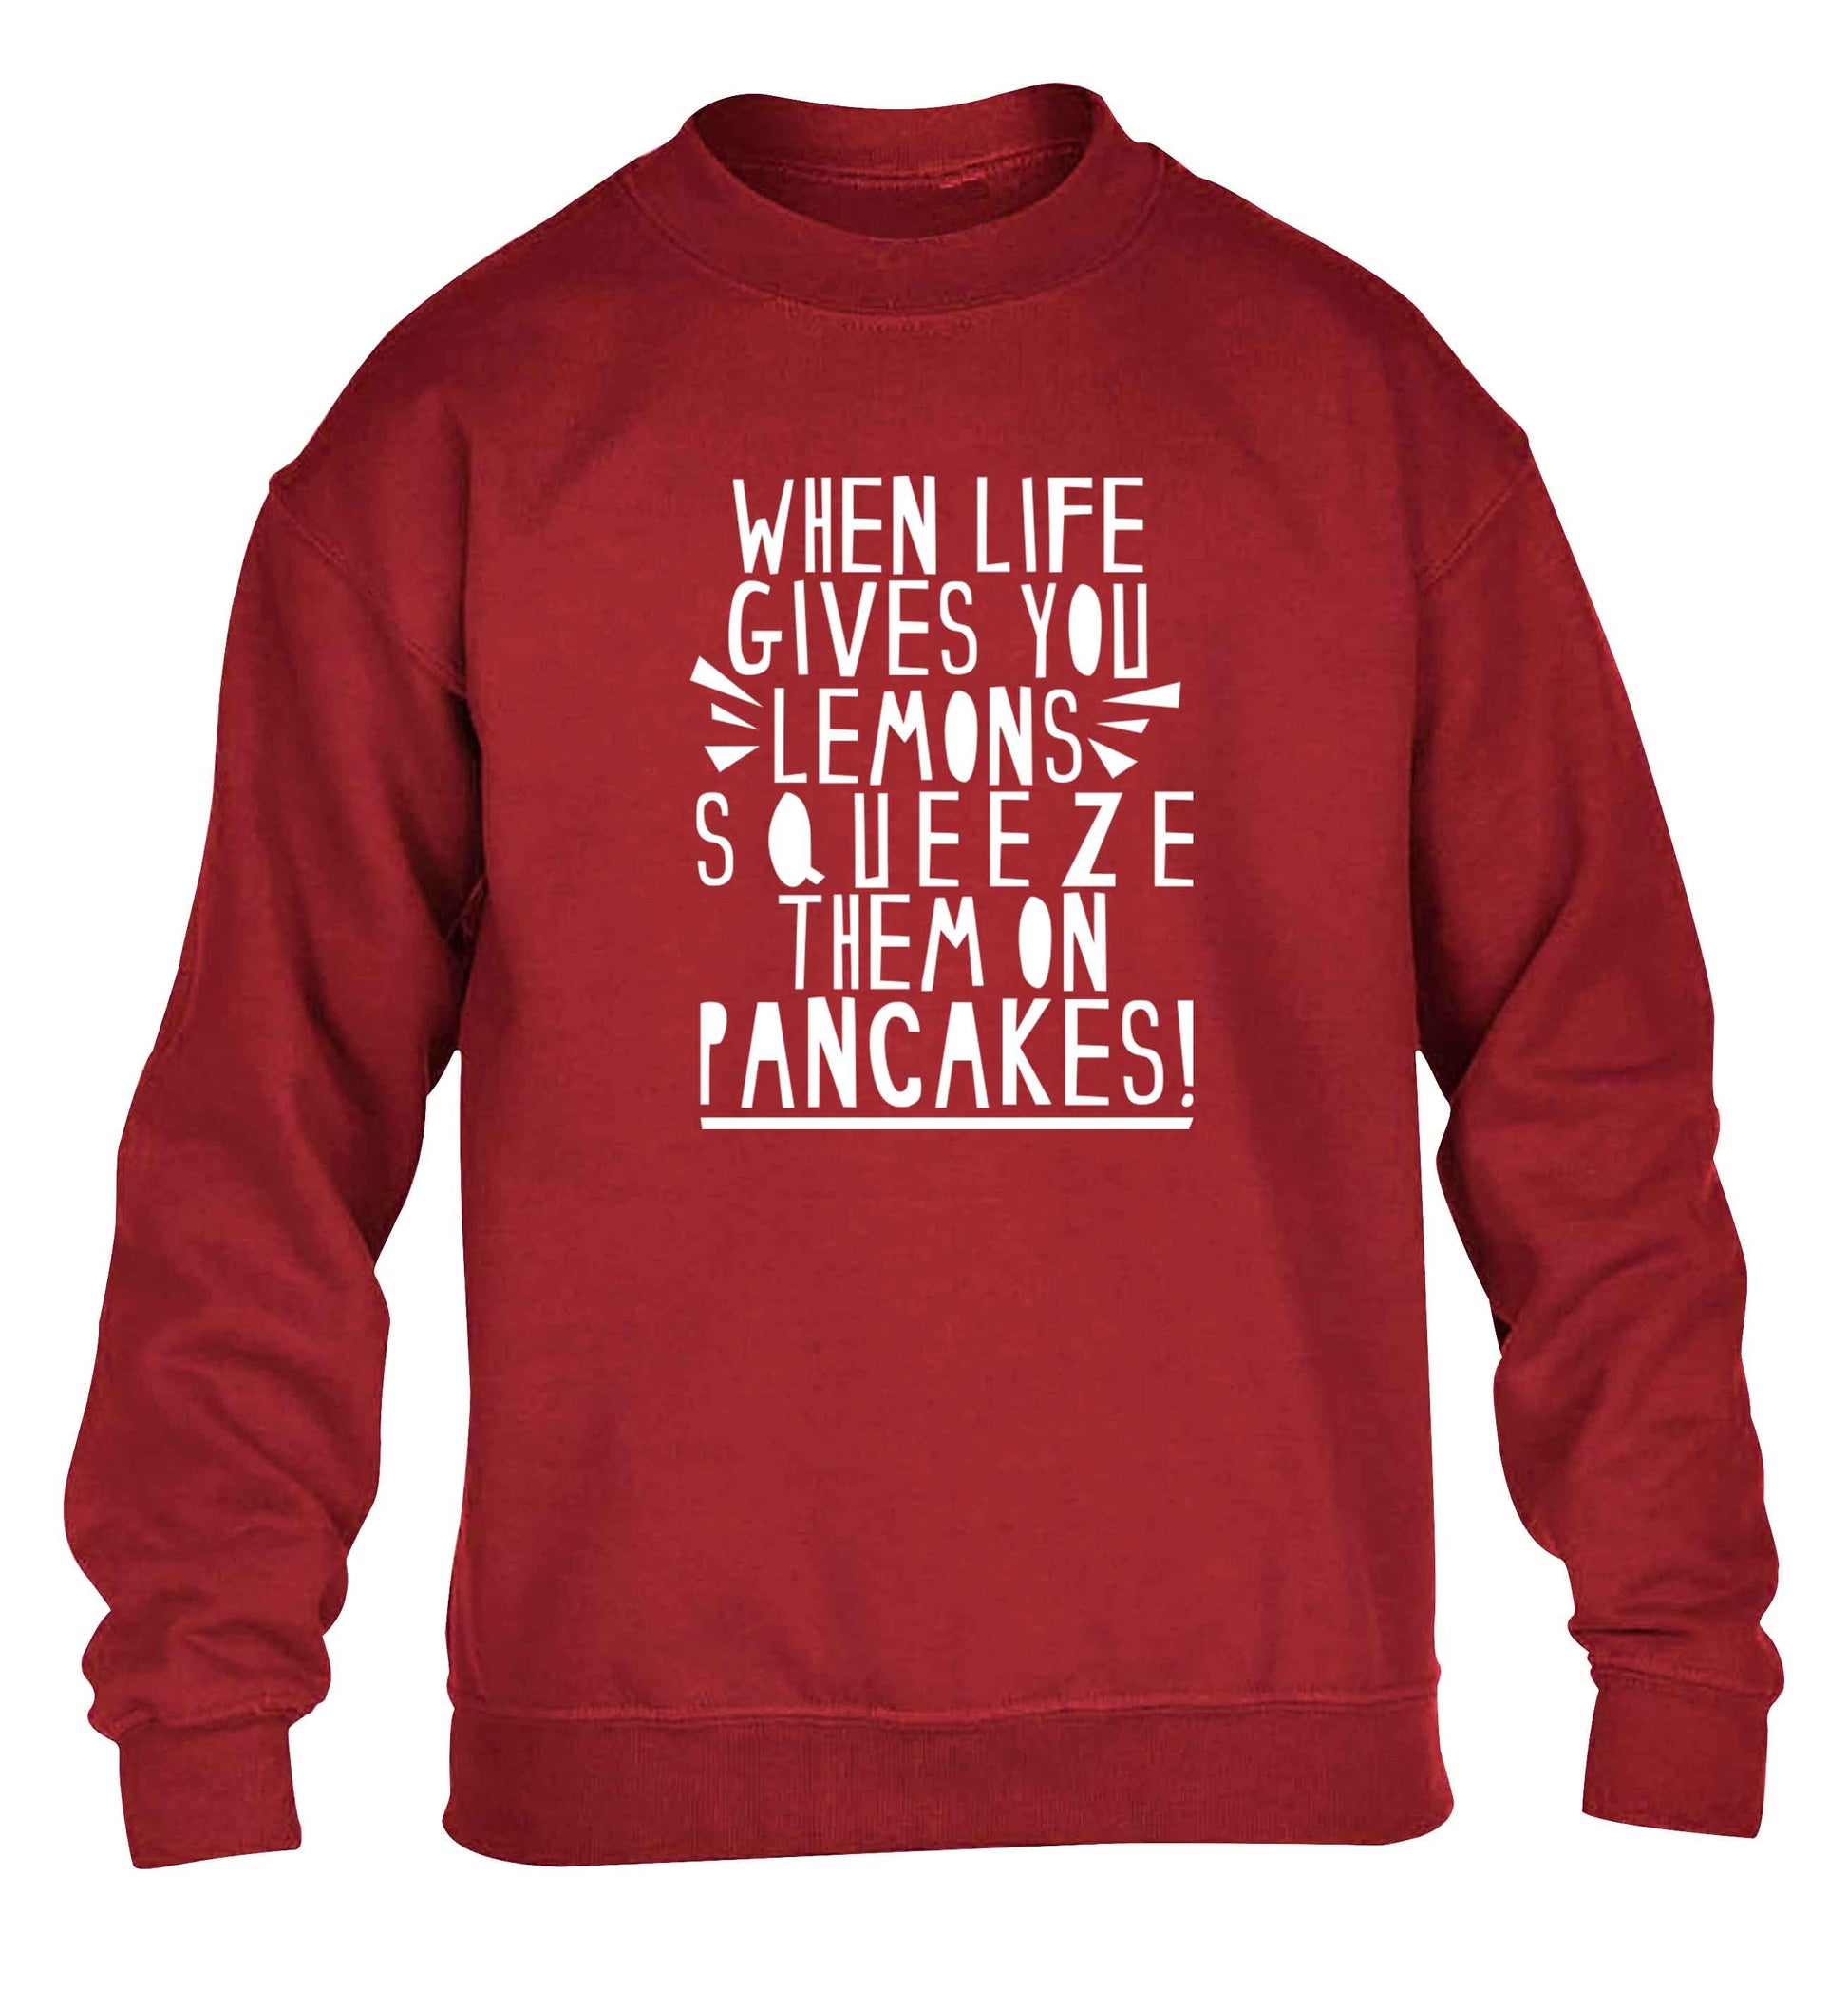 When life gives you lemons squeeze them on pancakes! children's grey sweater 12-13 Years